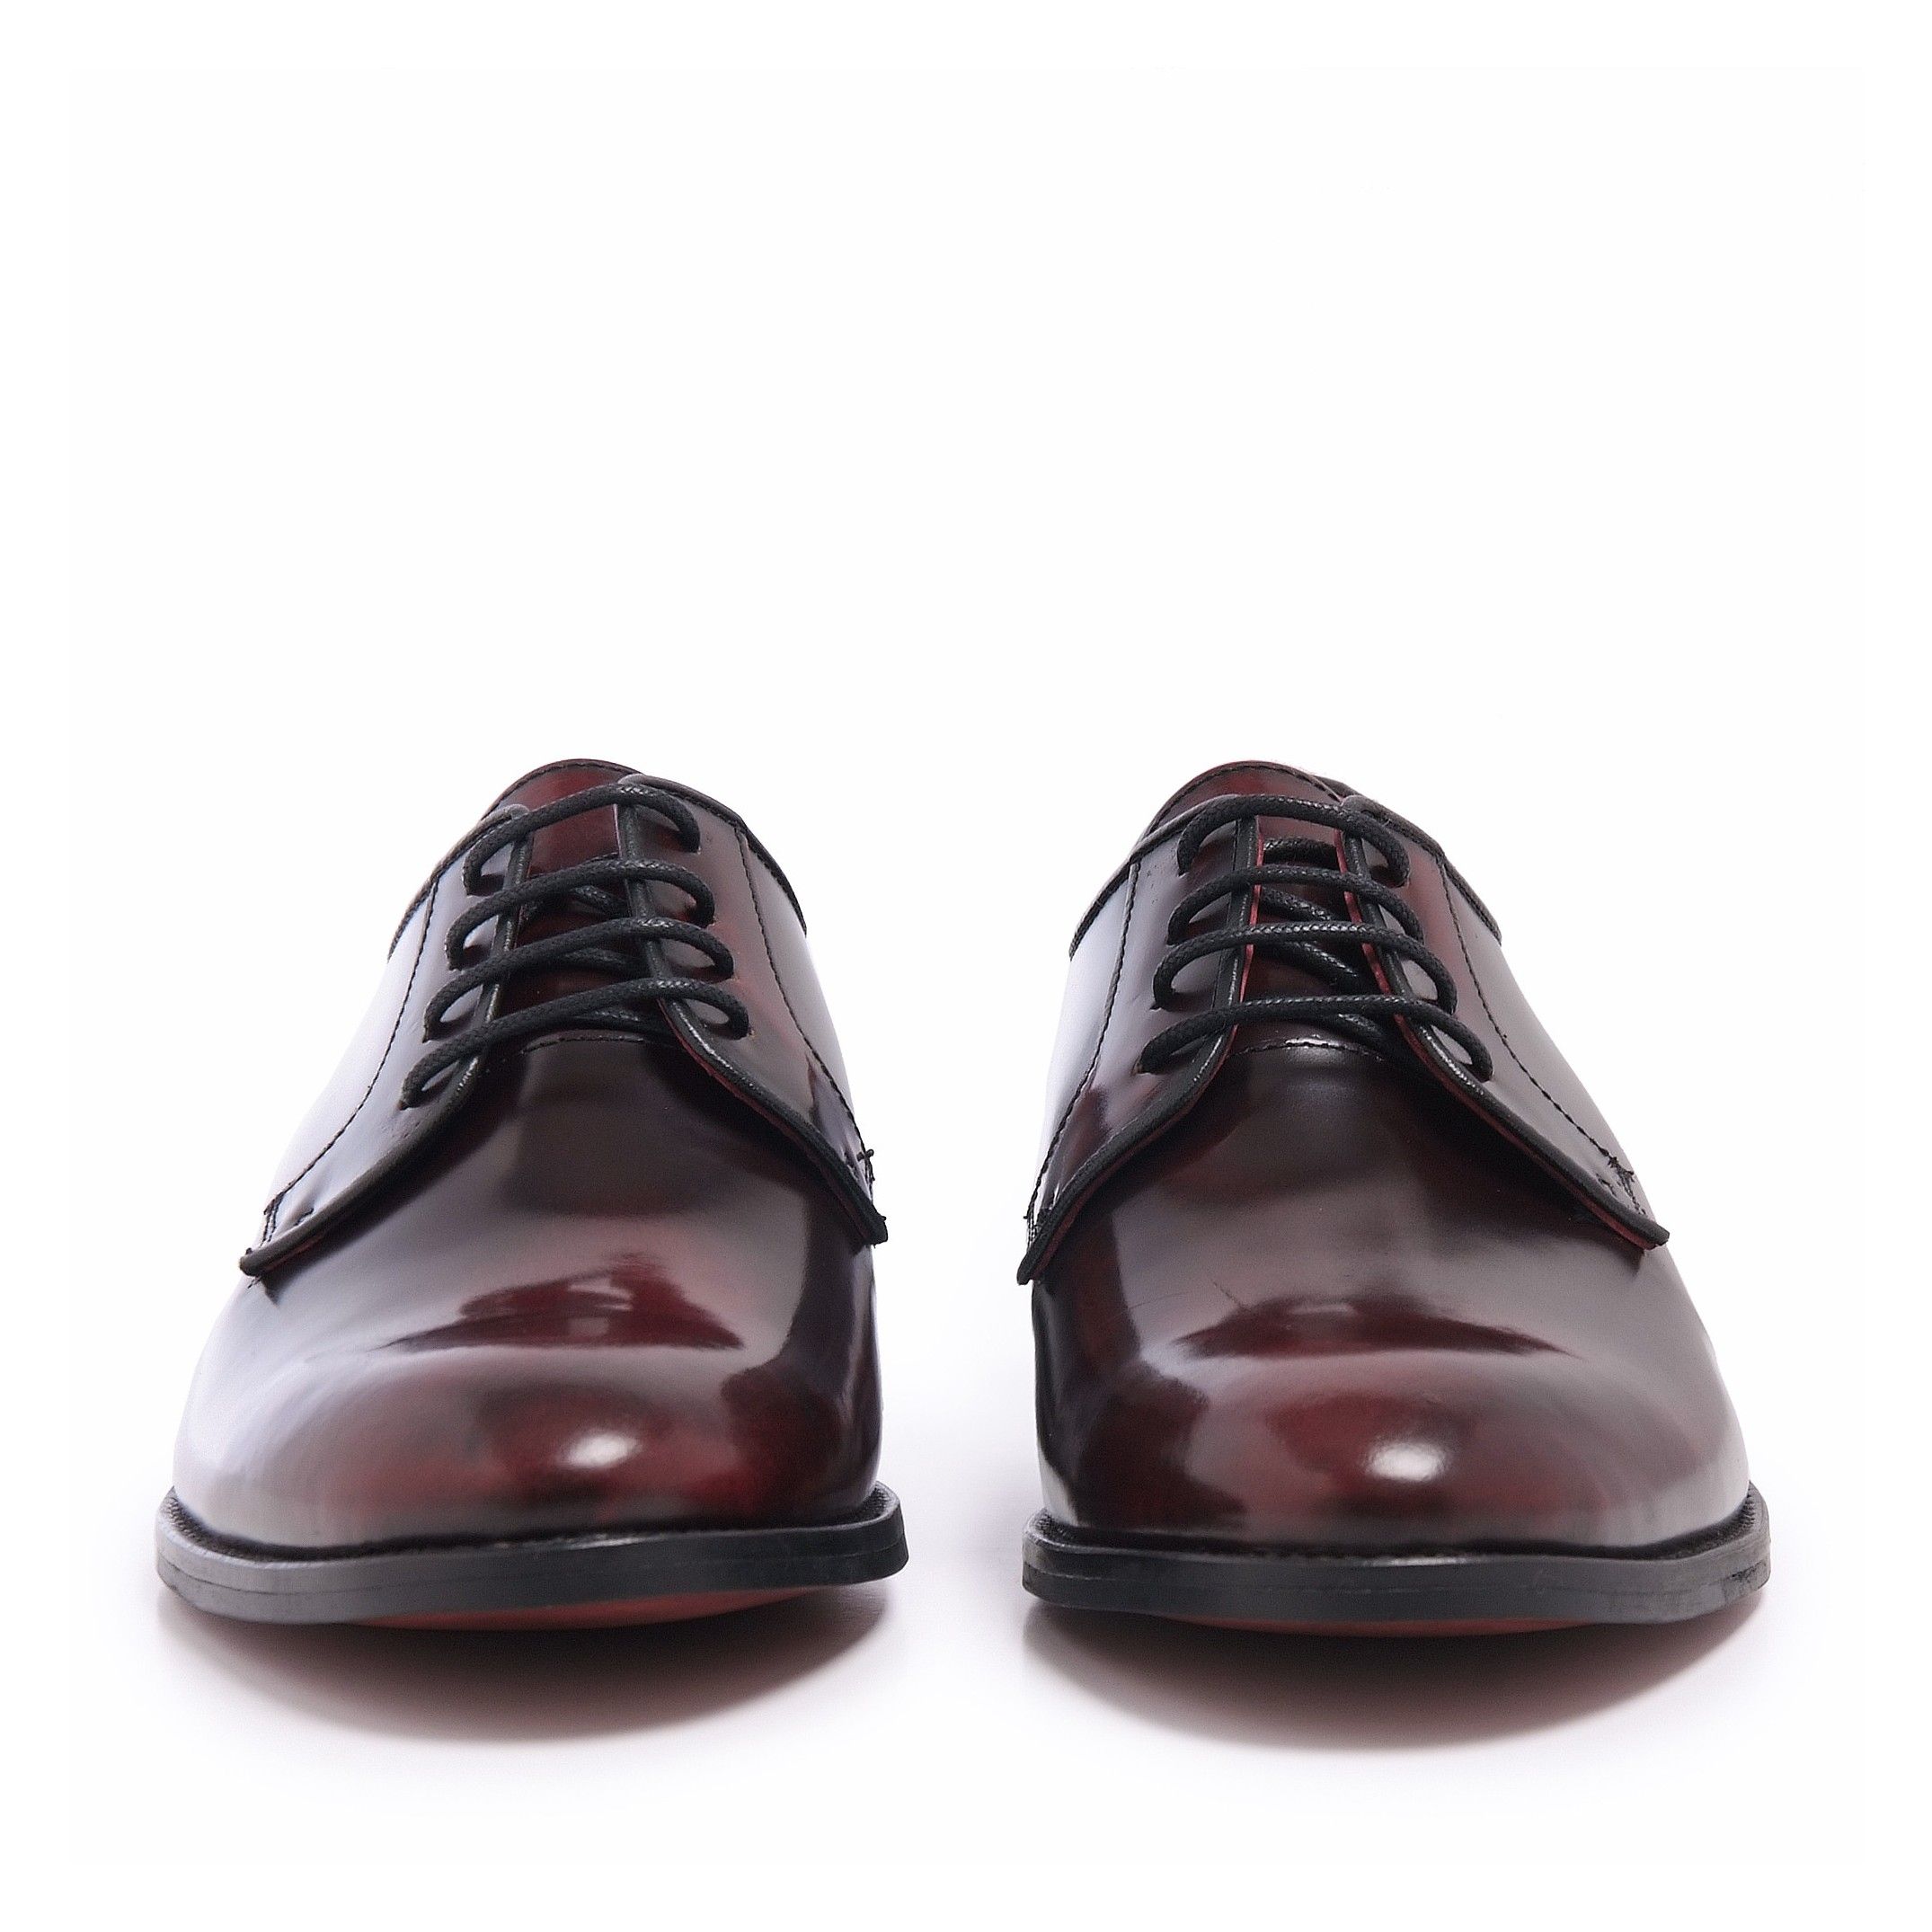 Blucher leather shoes. Upper and inner made of leather. Rubber sole. Lace closure. Made in Spain. By Castellanisimos